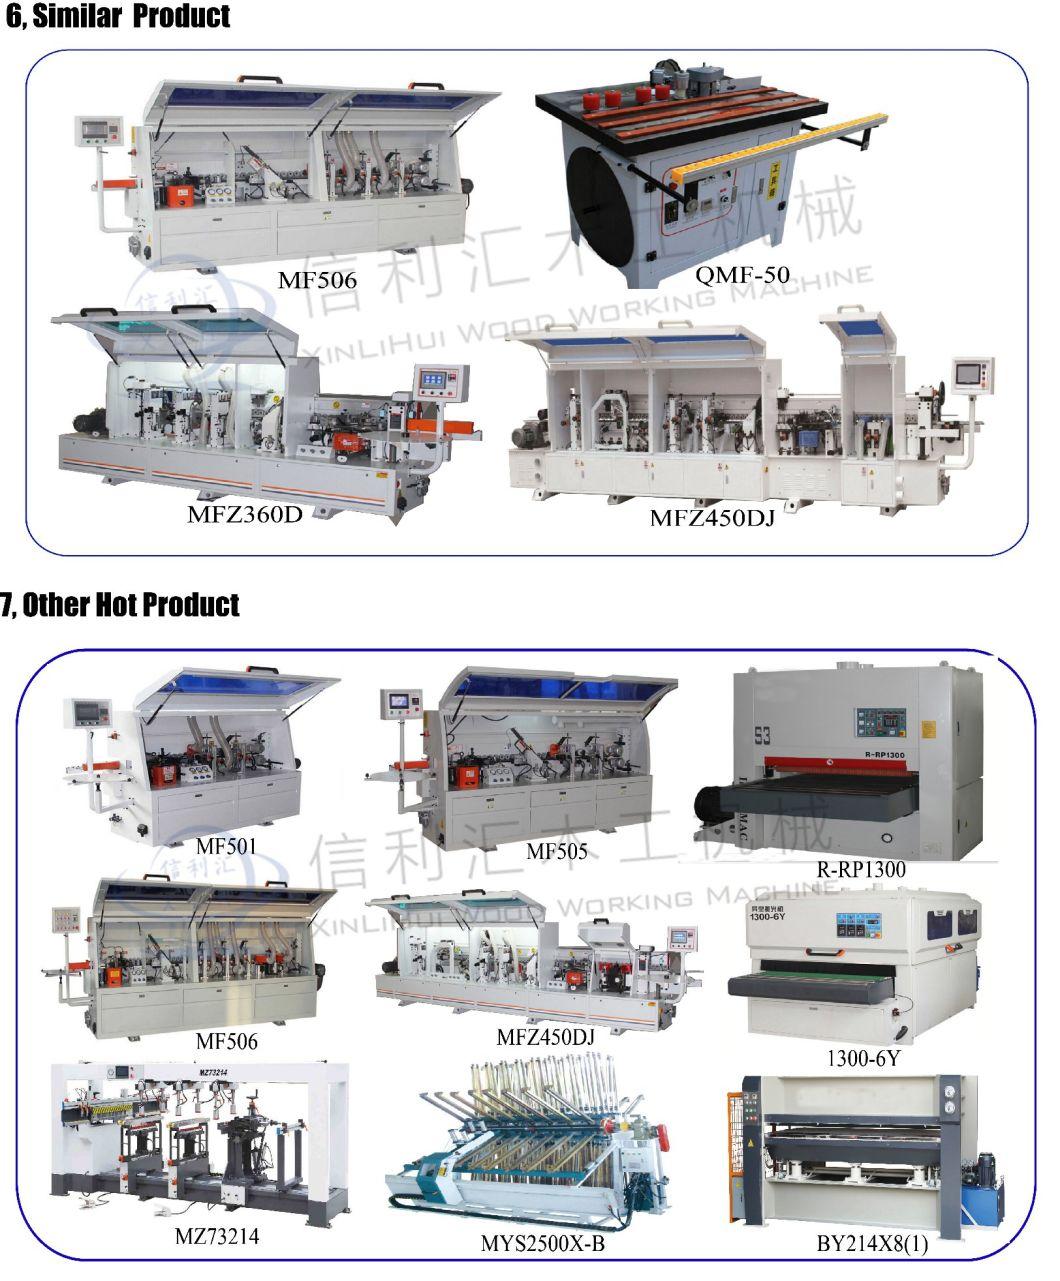 Made in China Auto Edge Banding Machine Edge Bander PVC Sealing Machine with Plastic PVC with Function of Slotting Mfz518A in Qingdao City